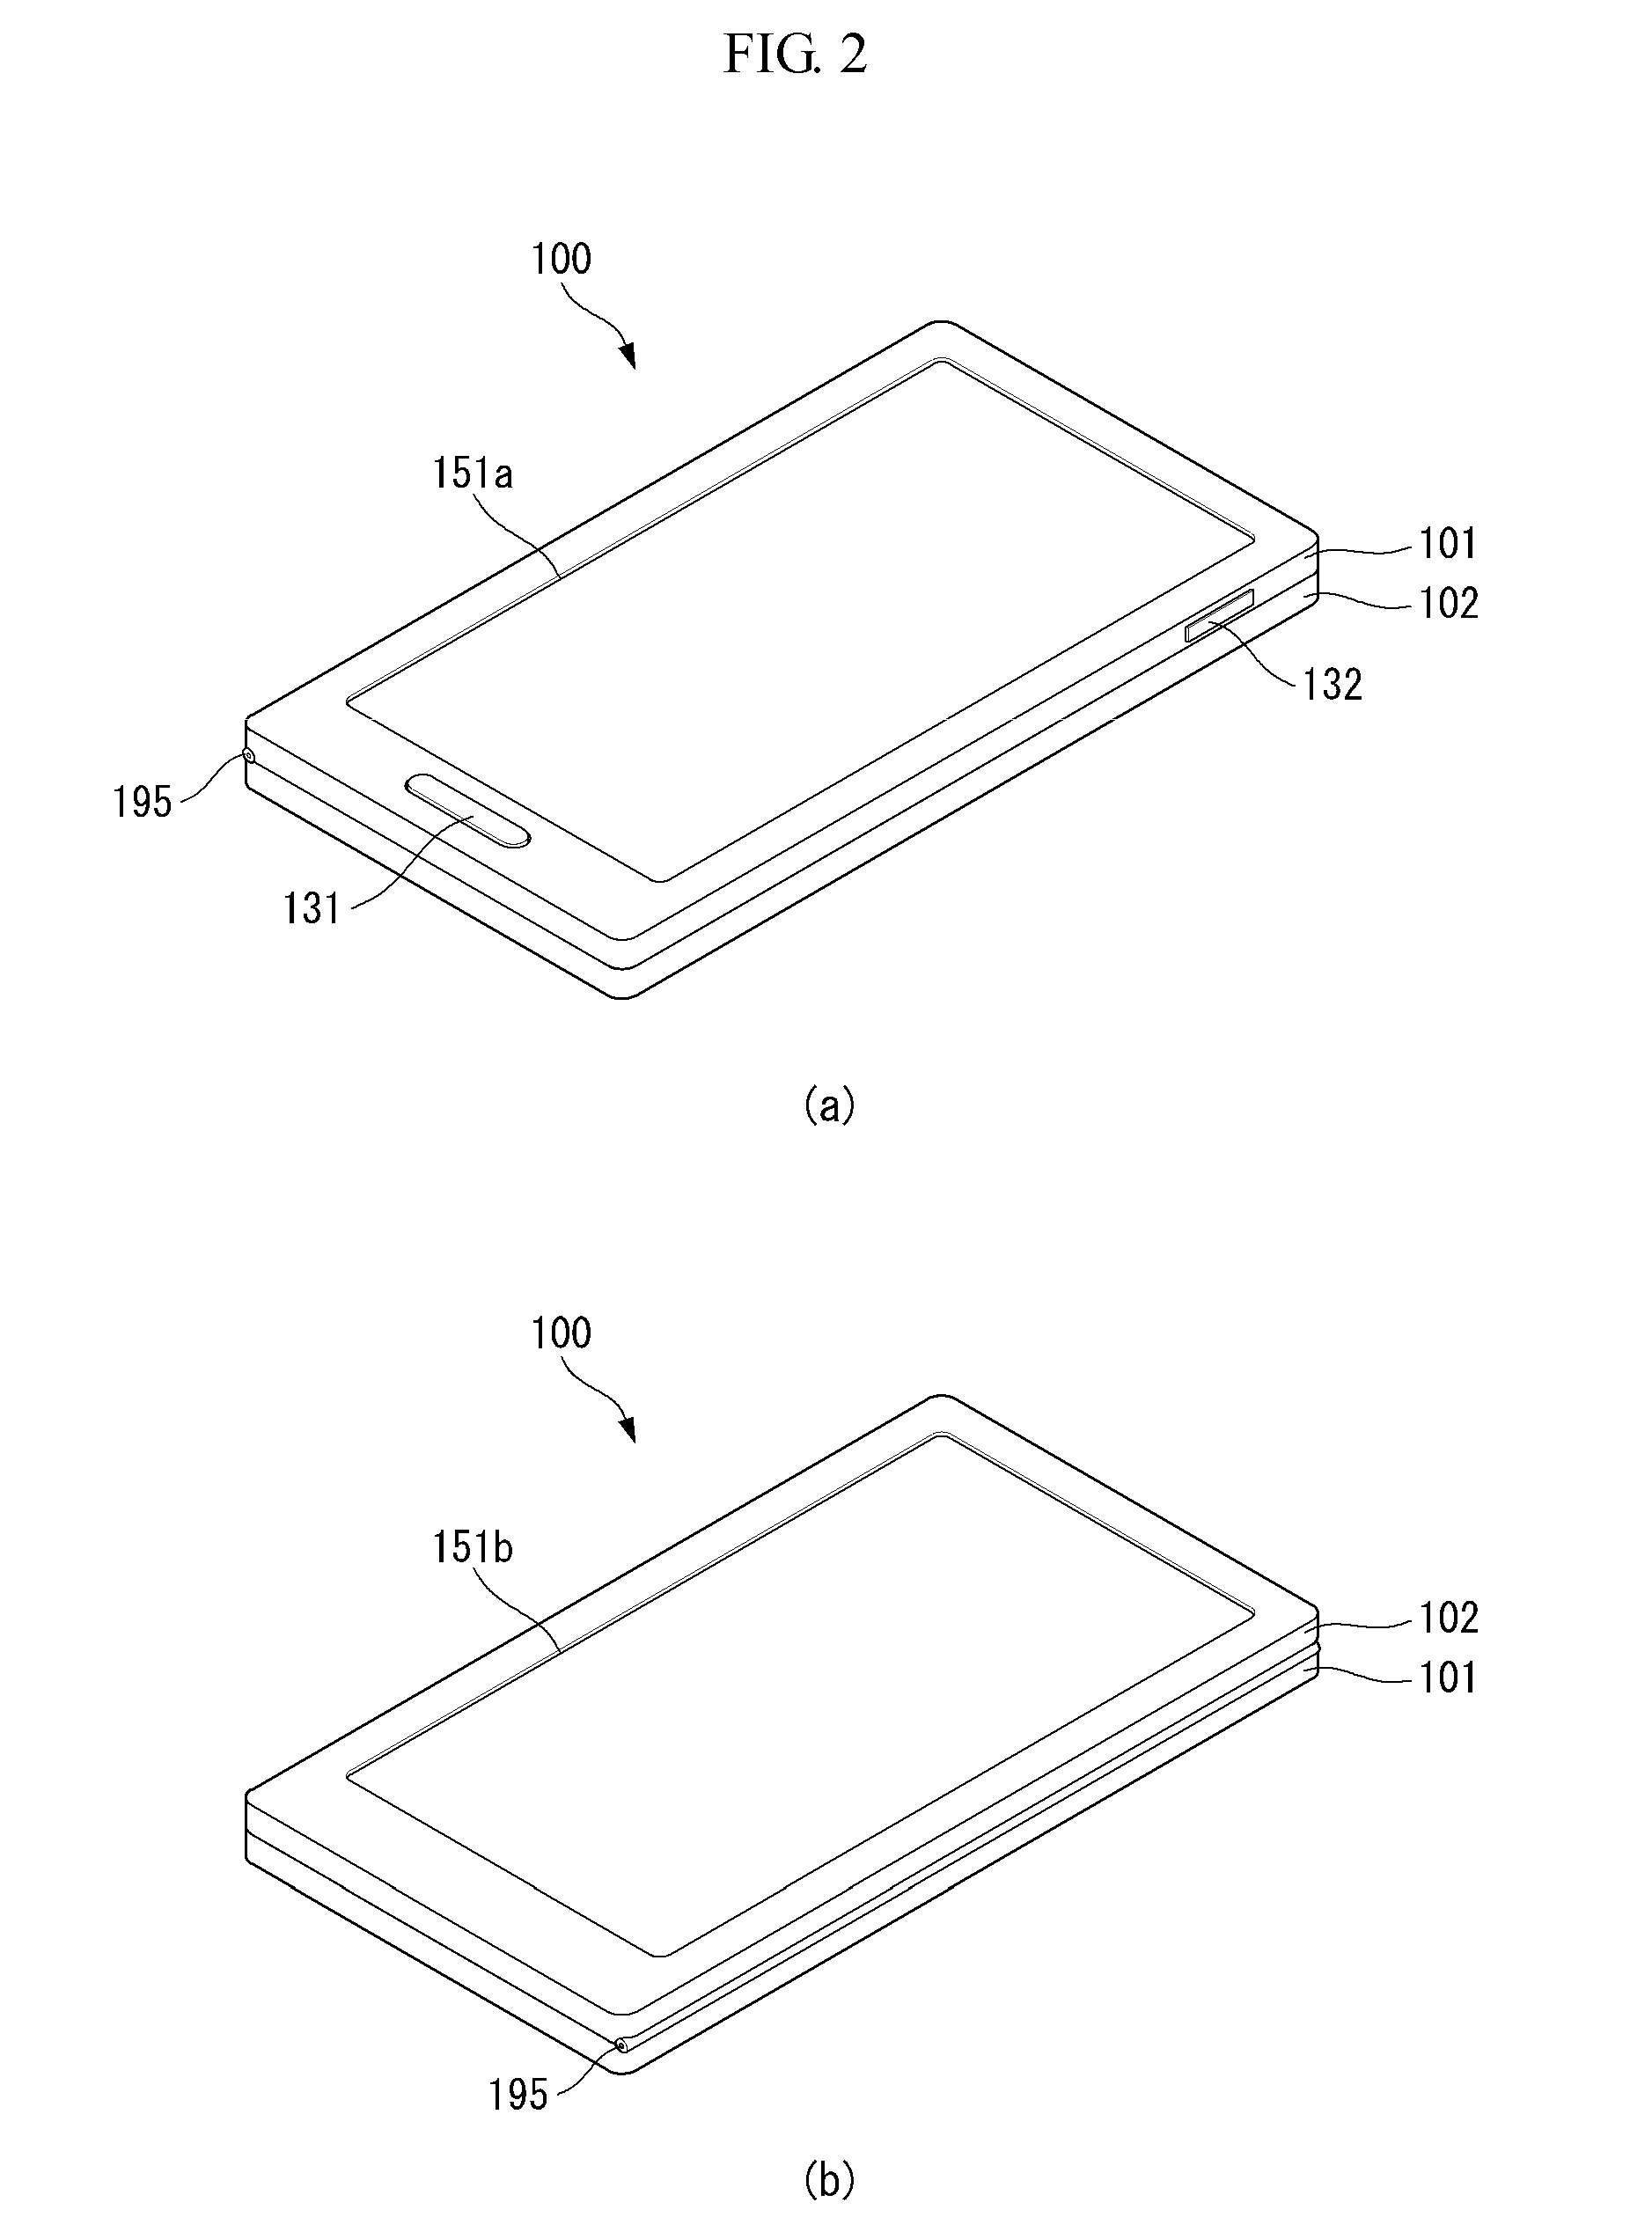 Mobile terminal and method of providing graphic user interface using the same